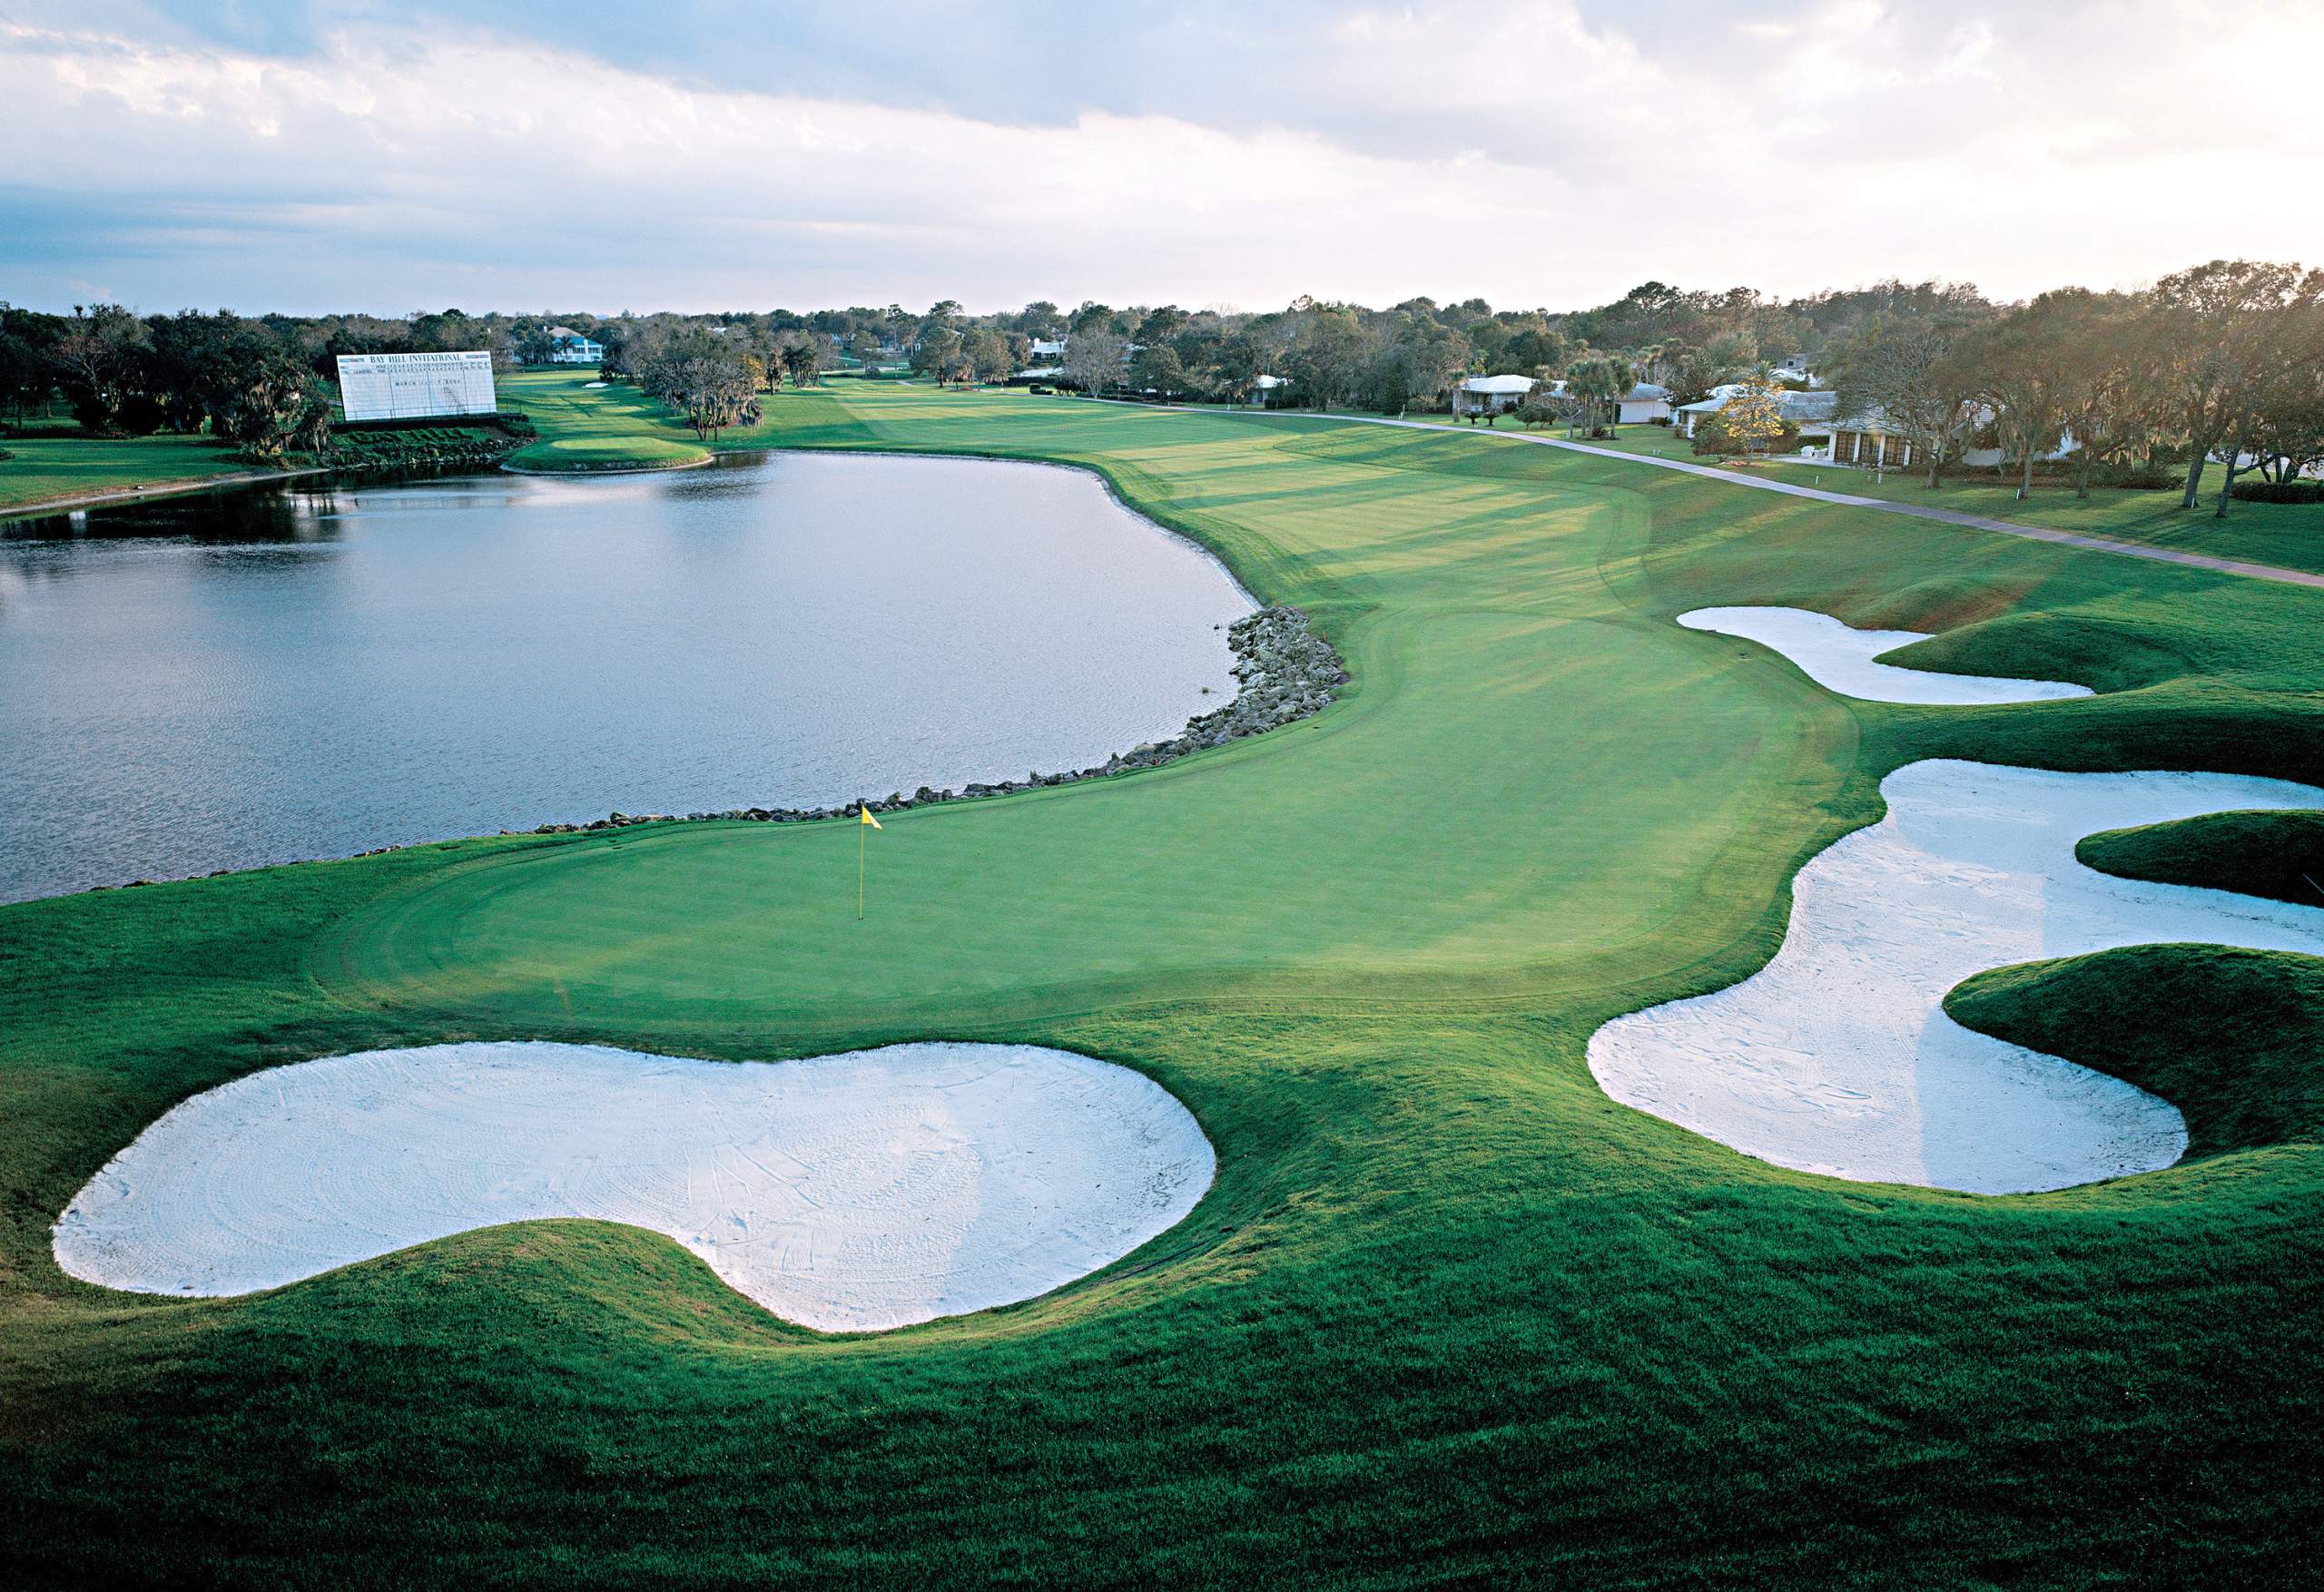 <em><b>Course Location: Orlando, Florida</b></em> The Bay Hill Club & Lodge stands as a bastion of exclusive golfing and hospitality nestled in the sun-kissed landscapes of Bay Hill, Florida, a serene suburb southwest of Orlando. Crafted under the meticulous eye of renowned architect Dick Wilson in 1961, the initial 18 holes, known as the Champion and Challenger nines, epitomize Wilson's ingenuity, boasting subtly elevated greens enhancing both visibility and drainage. Following Wilson's legacy, the additional nine holes, named the Charger Nine, were masterfully fashioned by Bob Simmons. From its inception in 1974 until the passing of its legendary proprietor, Arnold Palmer, in 2016, Bay Hill Club & Lodge bore the indelible stamp of Palmer's vision. Presently, under the stewardship of his daughter and son-in-law, Amy & Roy Saunders, the establishment continues to exude the essence of Palmer's legacy.